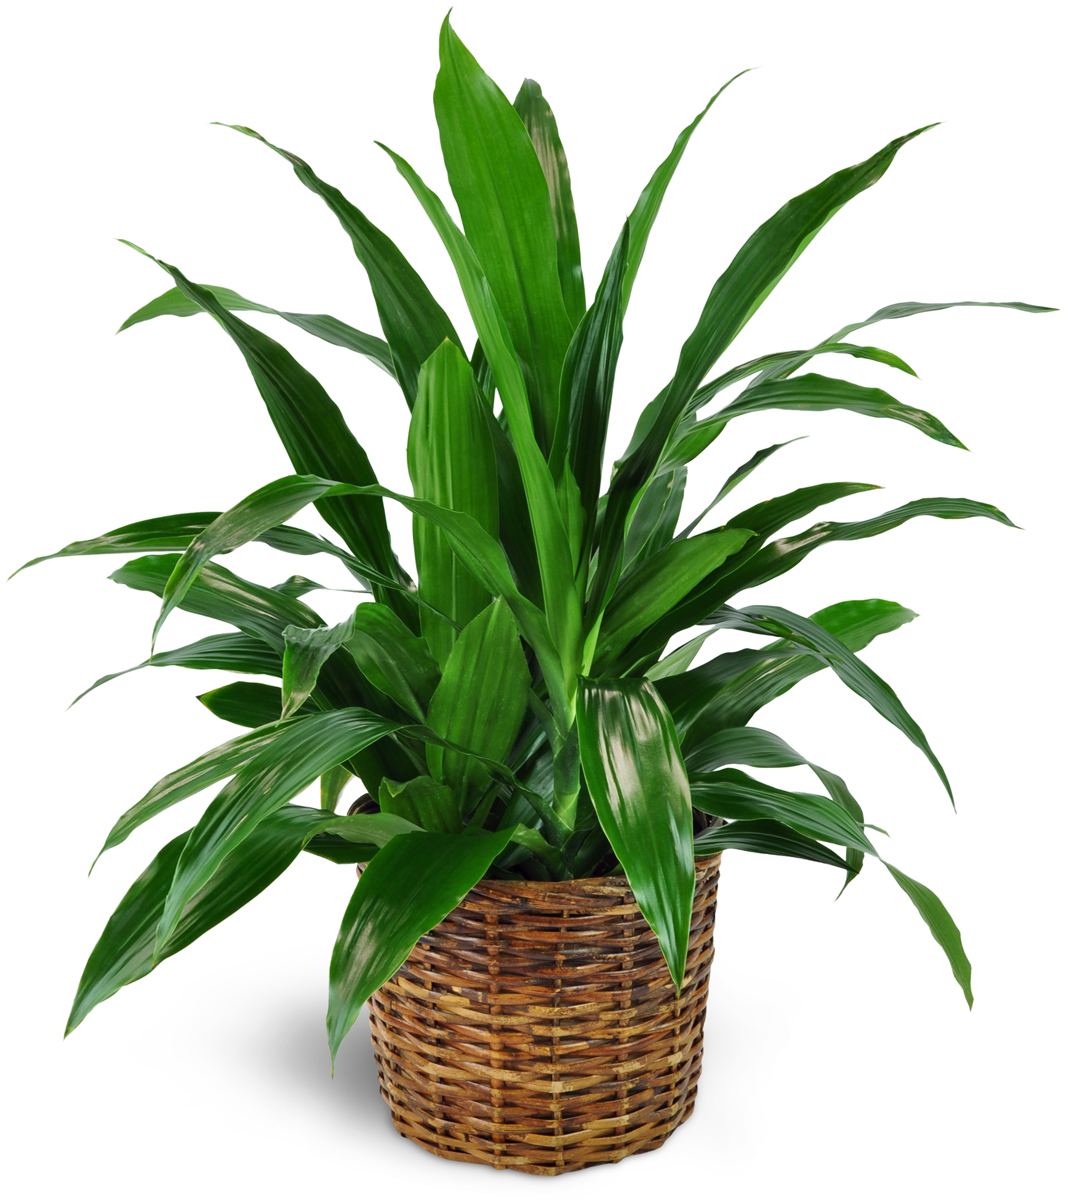 Worstelen Leerling ambulance Dracaena Plant in a Basket - Send to St. Ansgar, IA Today!